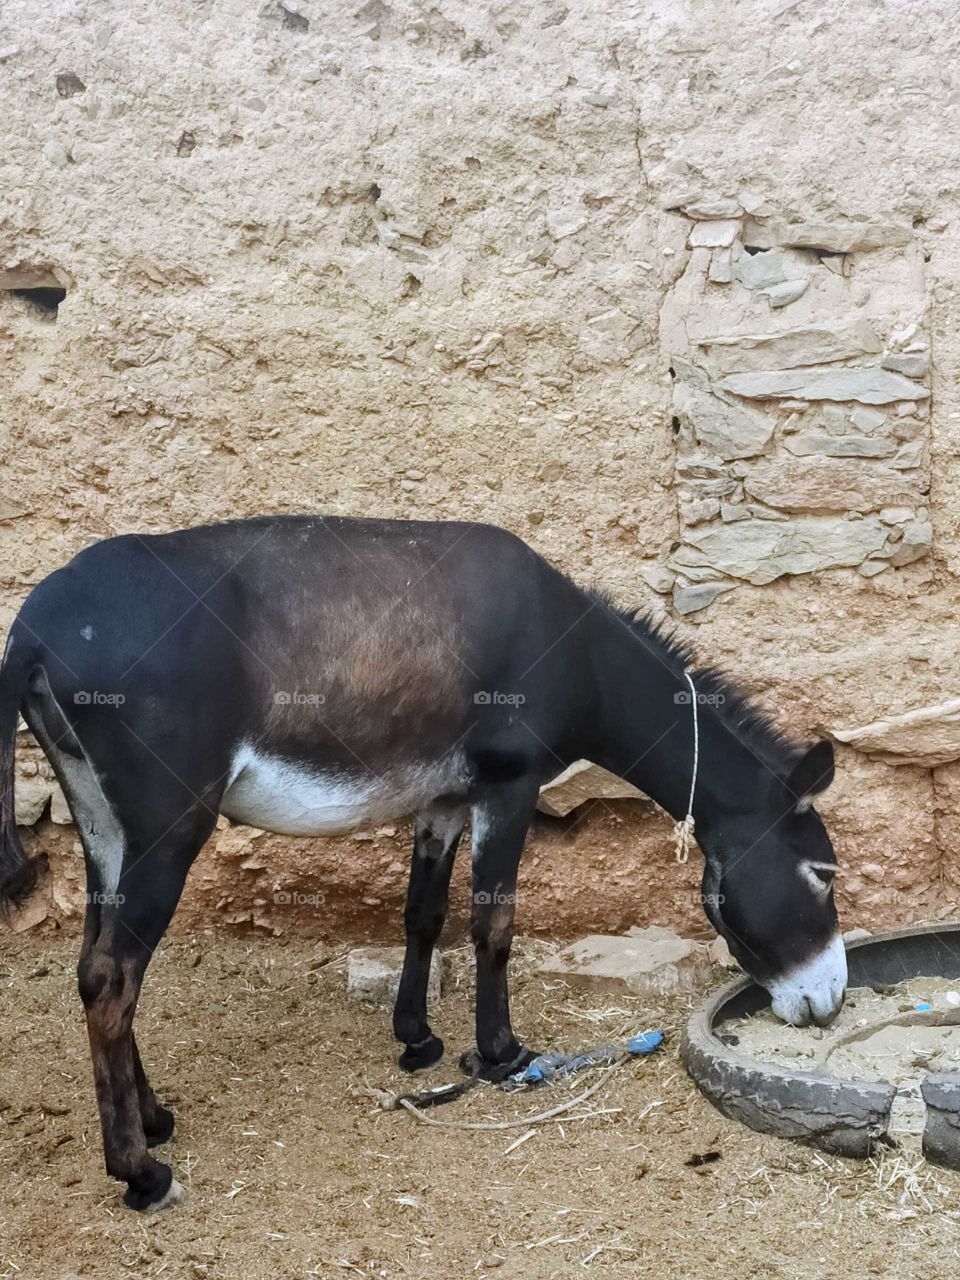 A donkey in a village we have visited,I took the picture while we were walking in the village.Asrir village in the region of Goulimine Morocco